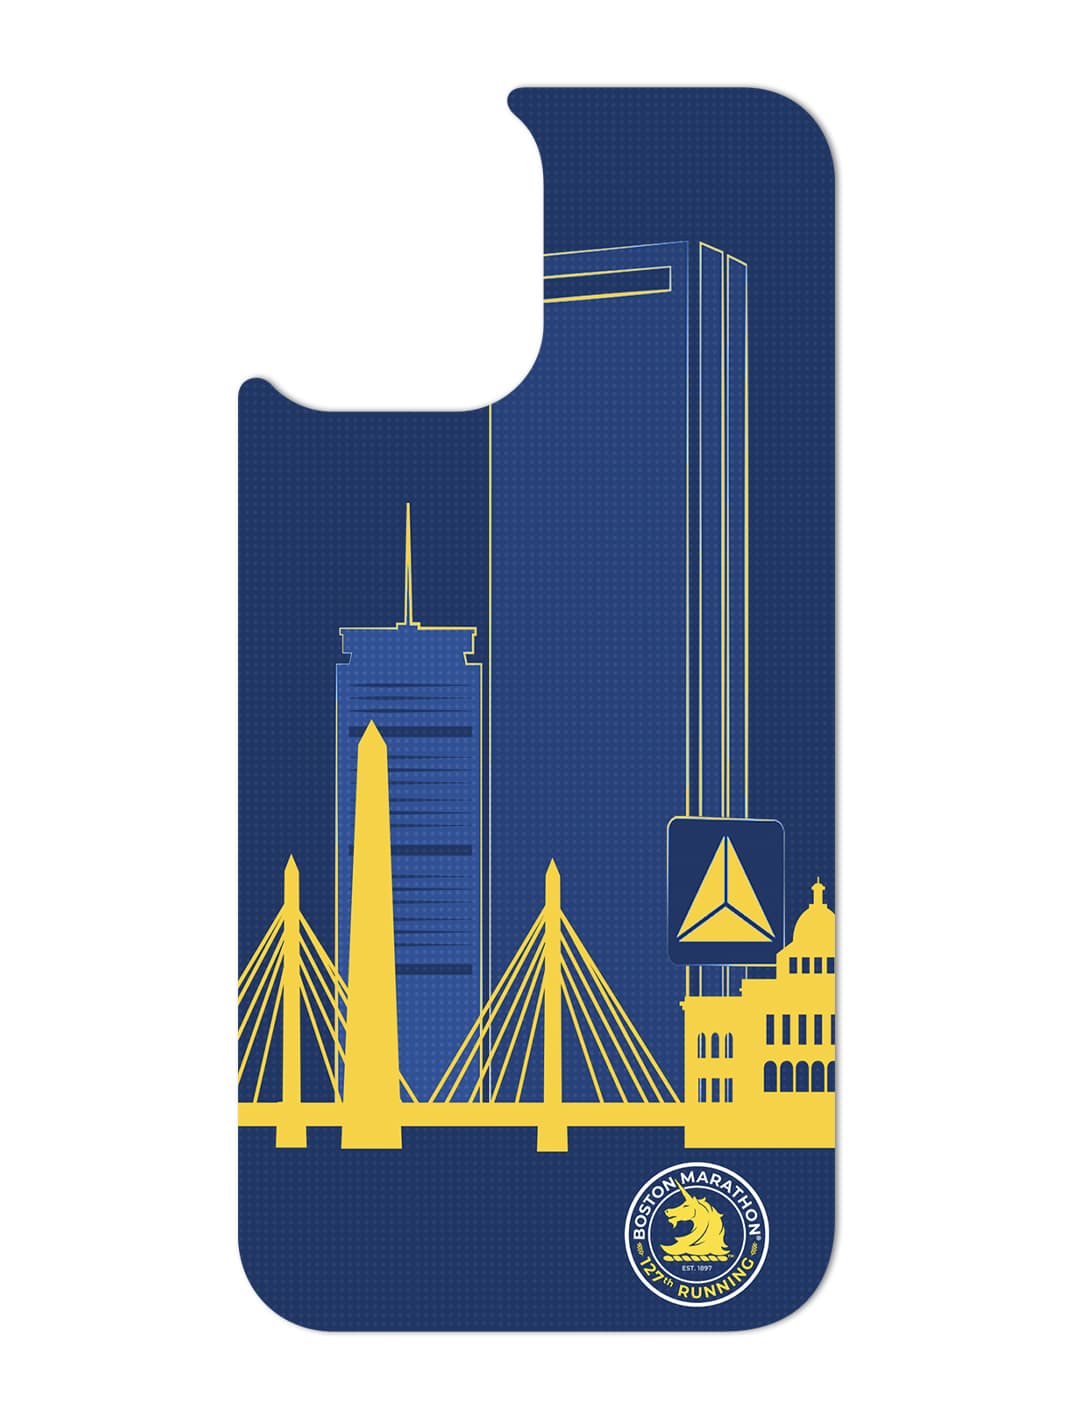 Boston Strong Patch 